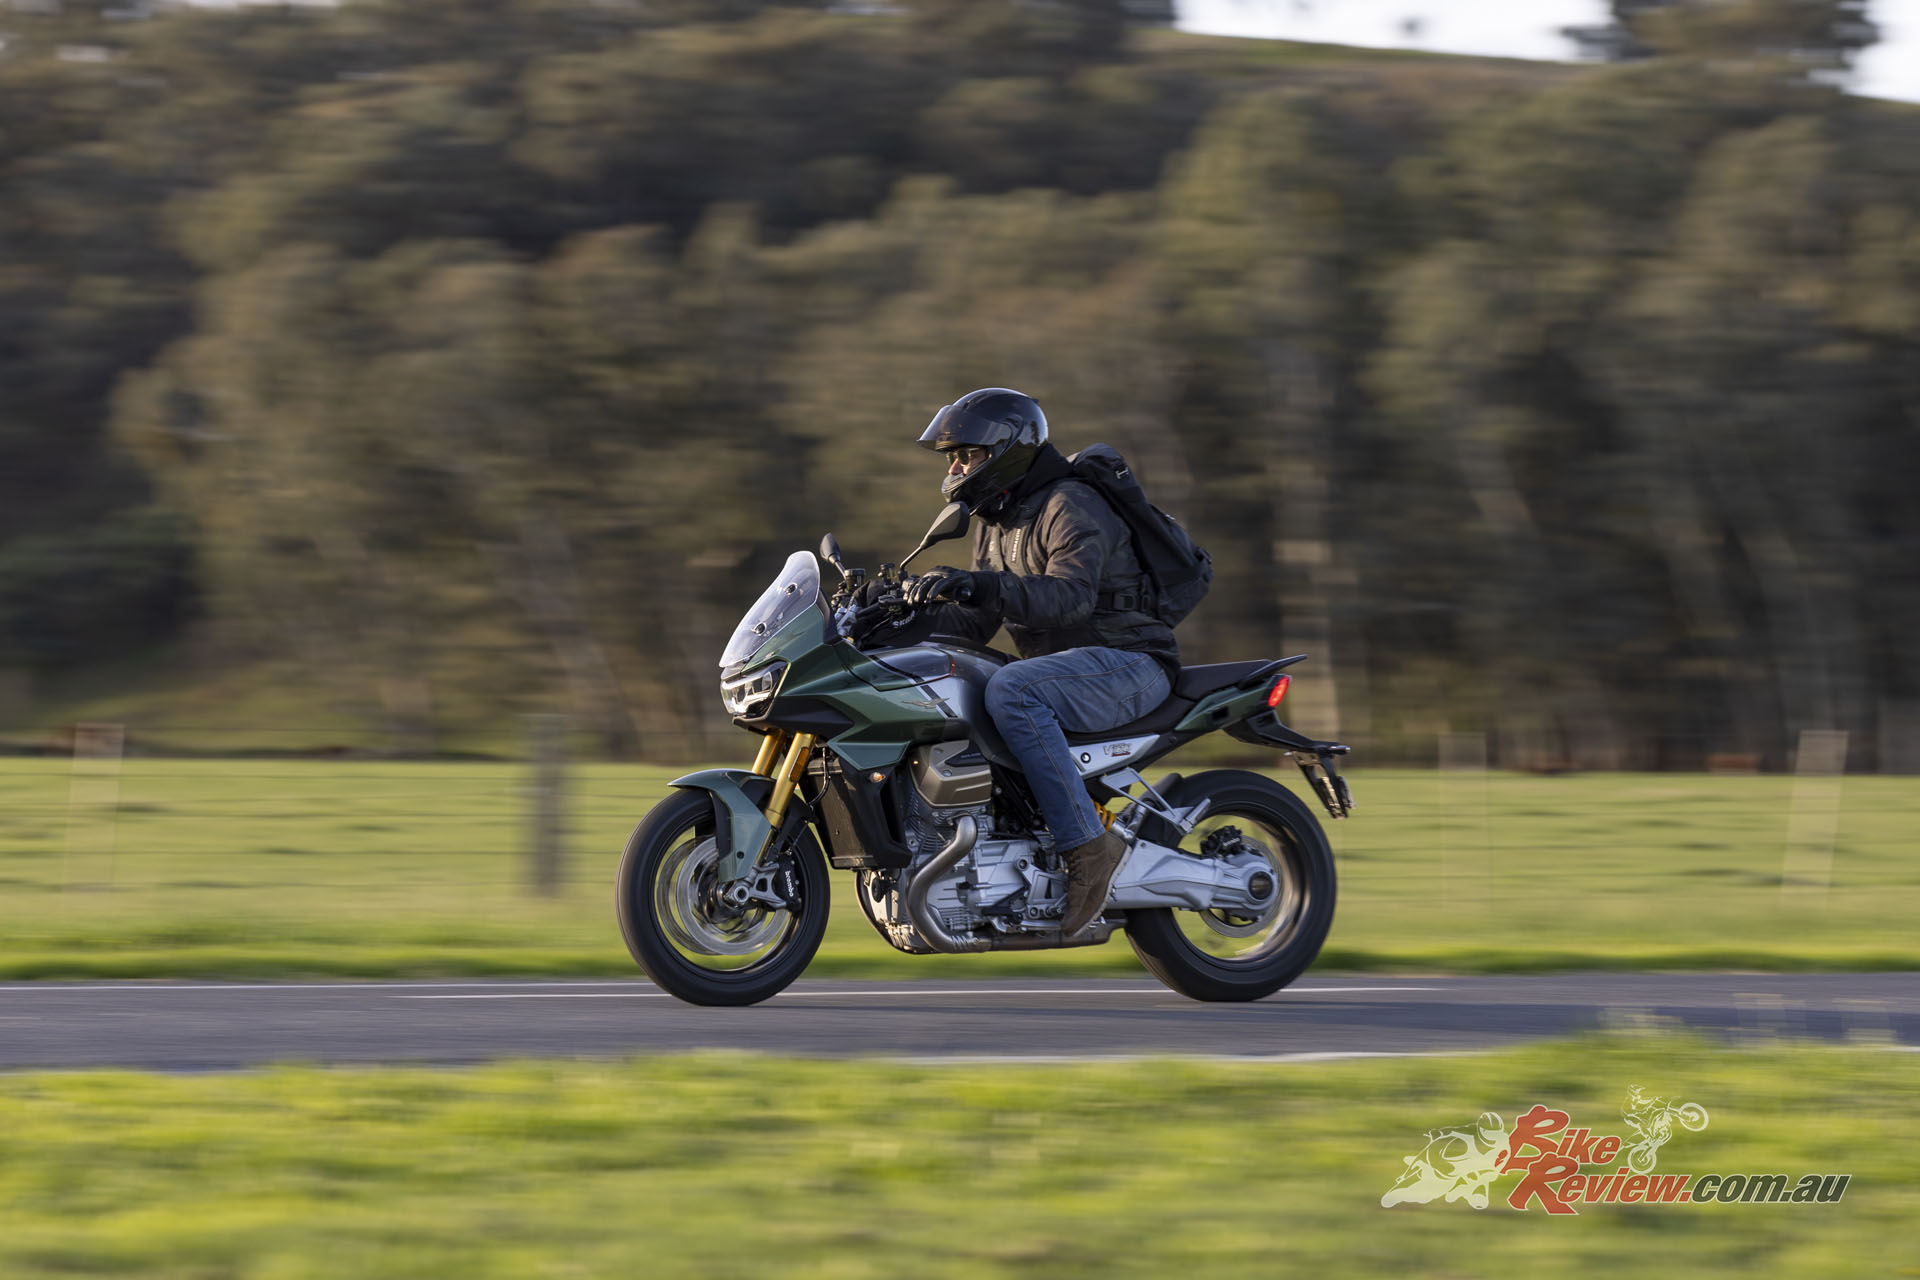 "As we hit the twisties in the mountains, that engine just pours on the power so smoothly, it has heaps of torque and the V-Twin configuration means you really feel it and it just makes for an incredible ride."